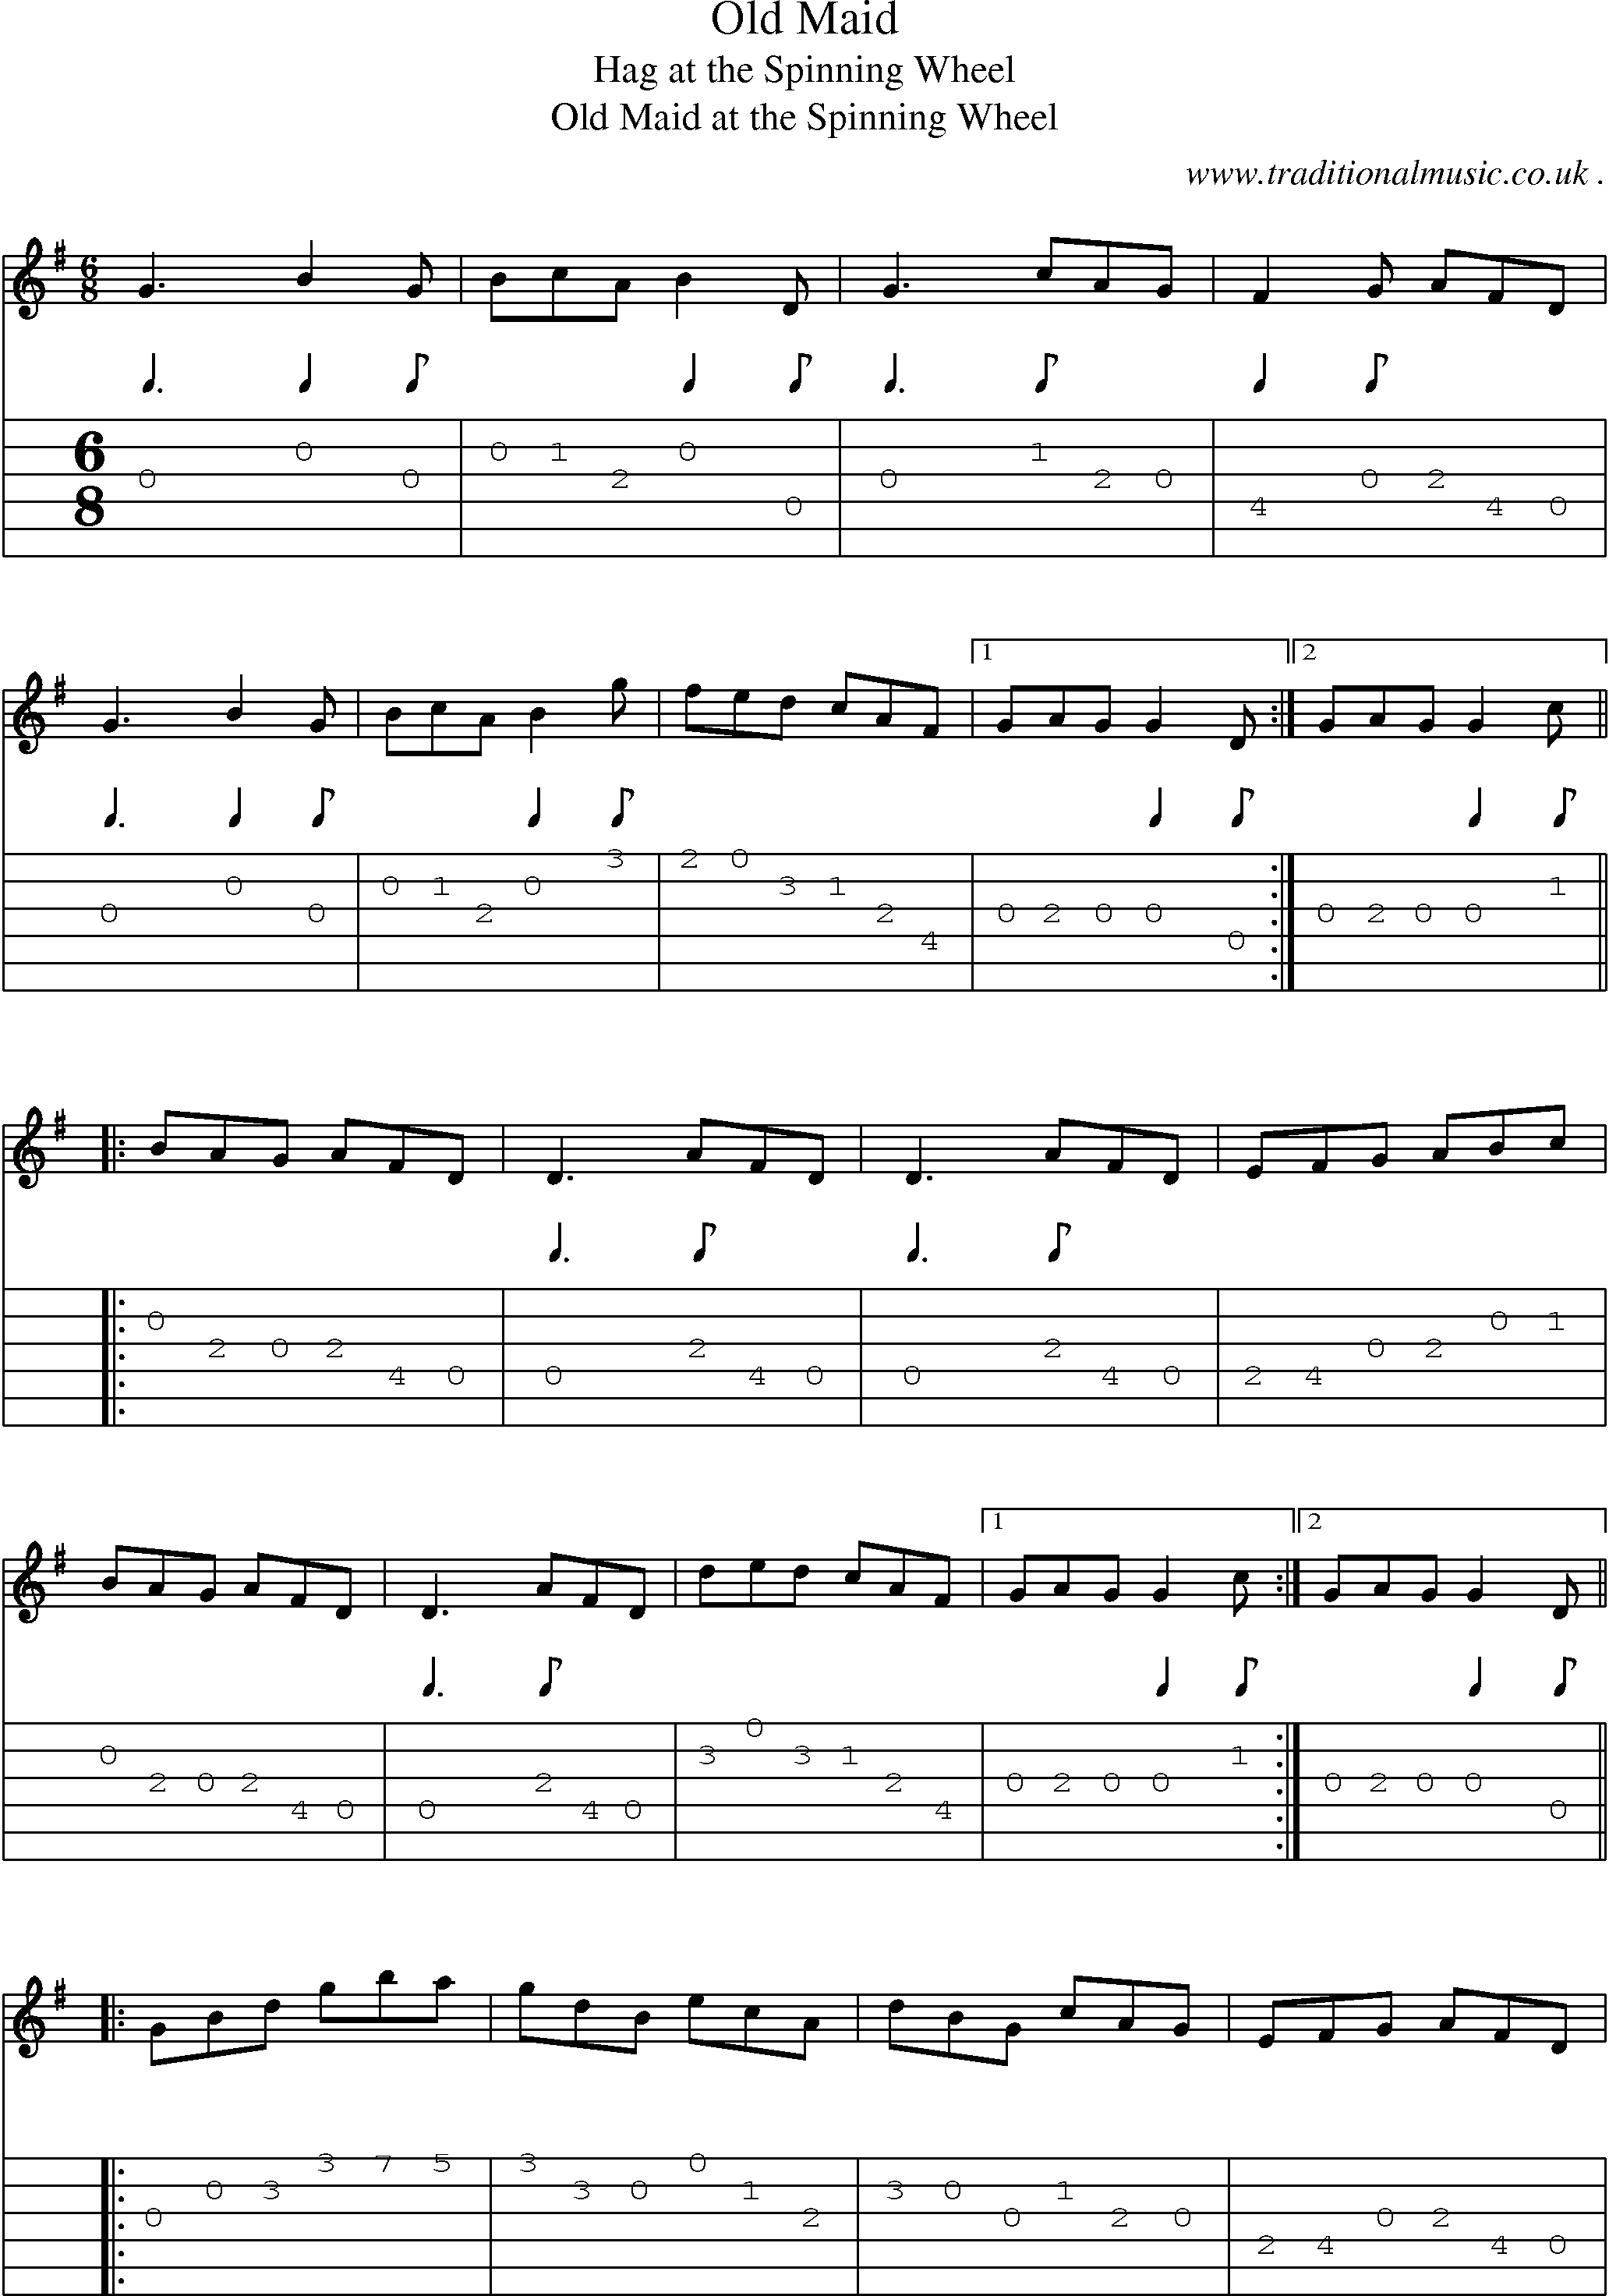 Sheet-Music and Guitar Tabs for Old Maid